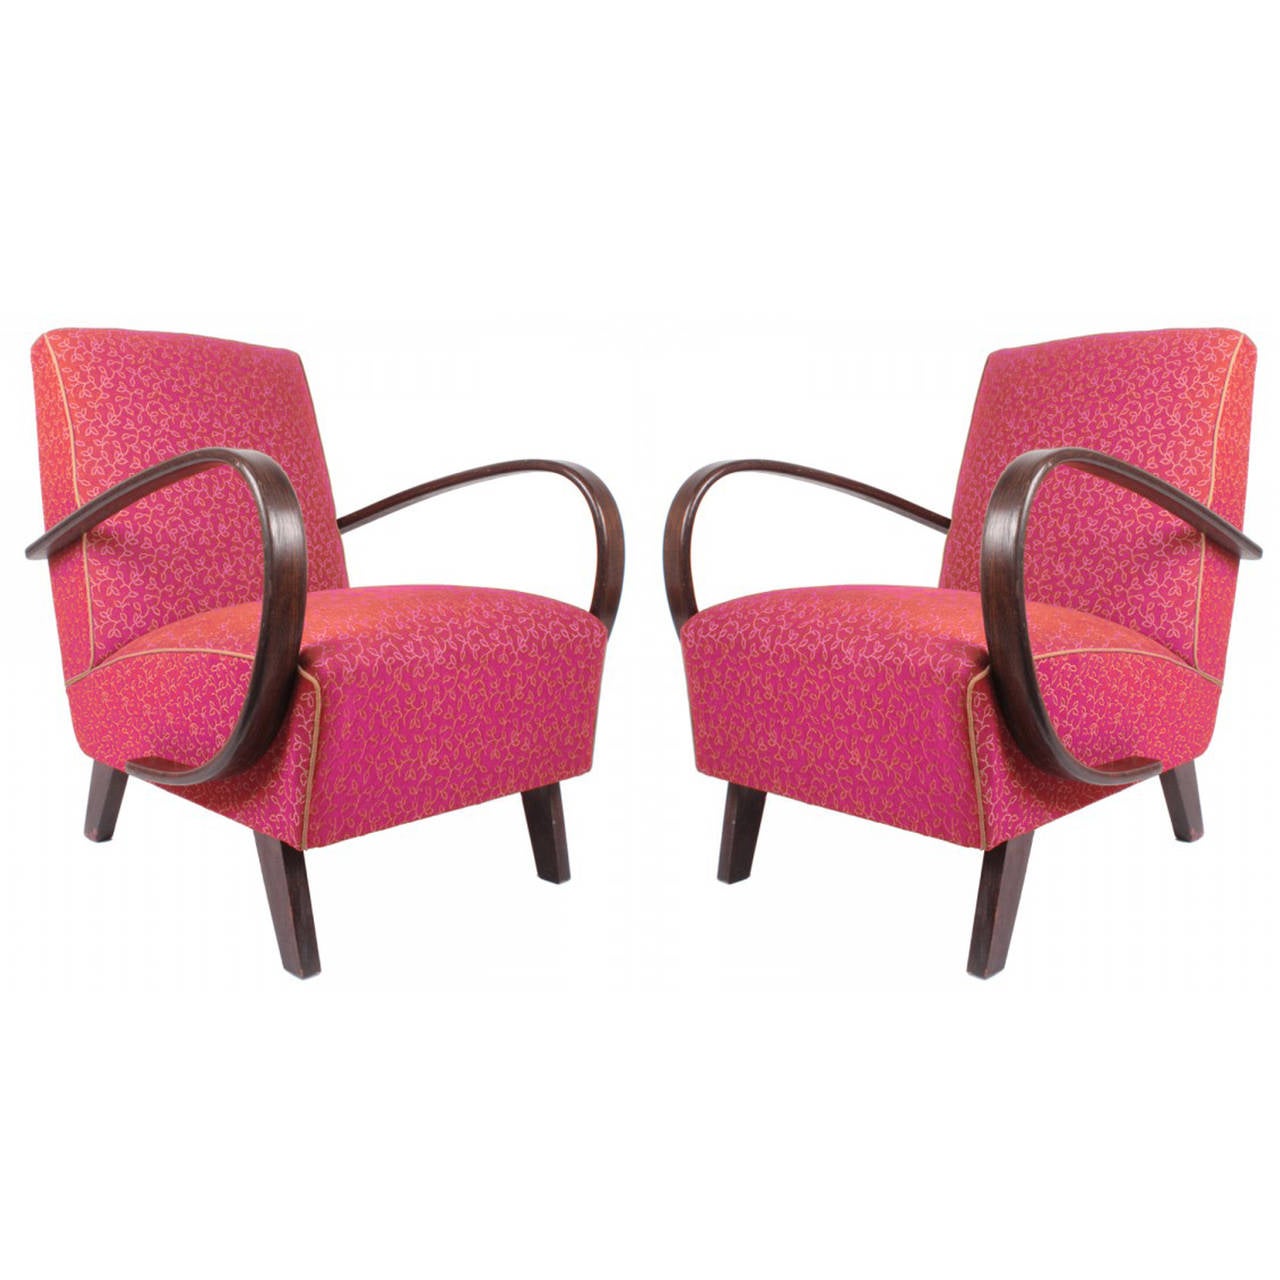 Pair of Art Deco Armchairs, circa 1930 by Jindrich Halabala For Sale at  1stDibs | jindrich halabala chairs for sale